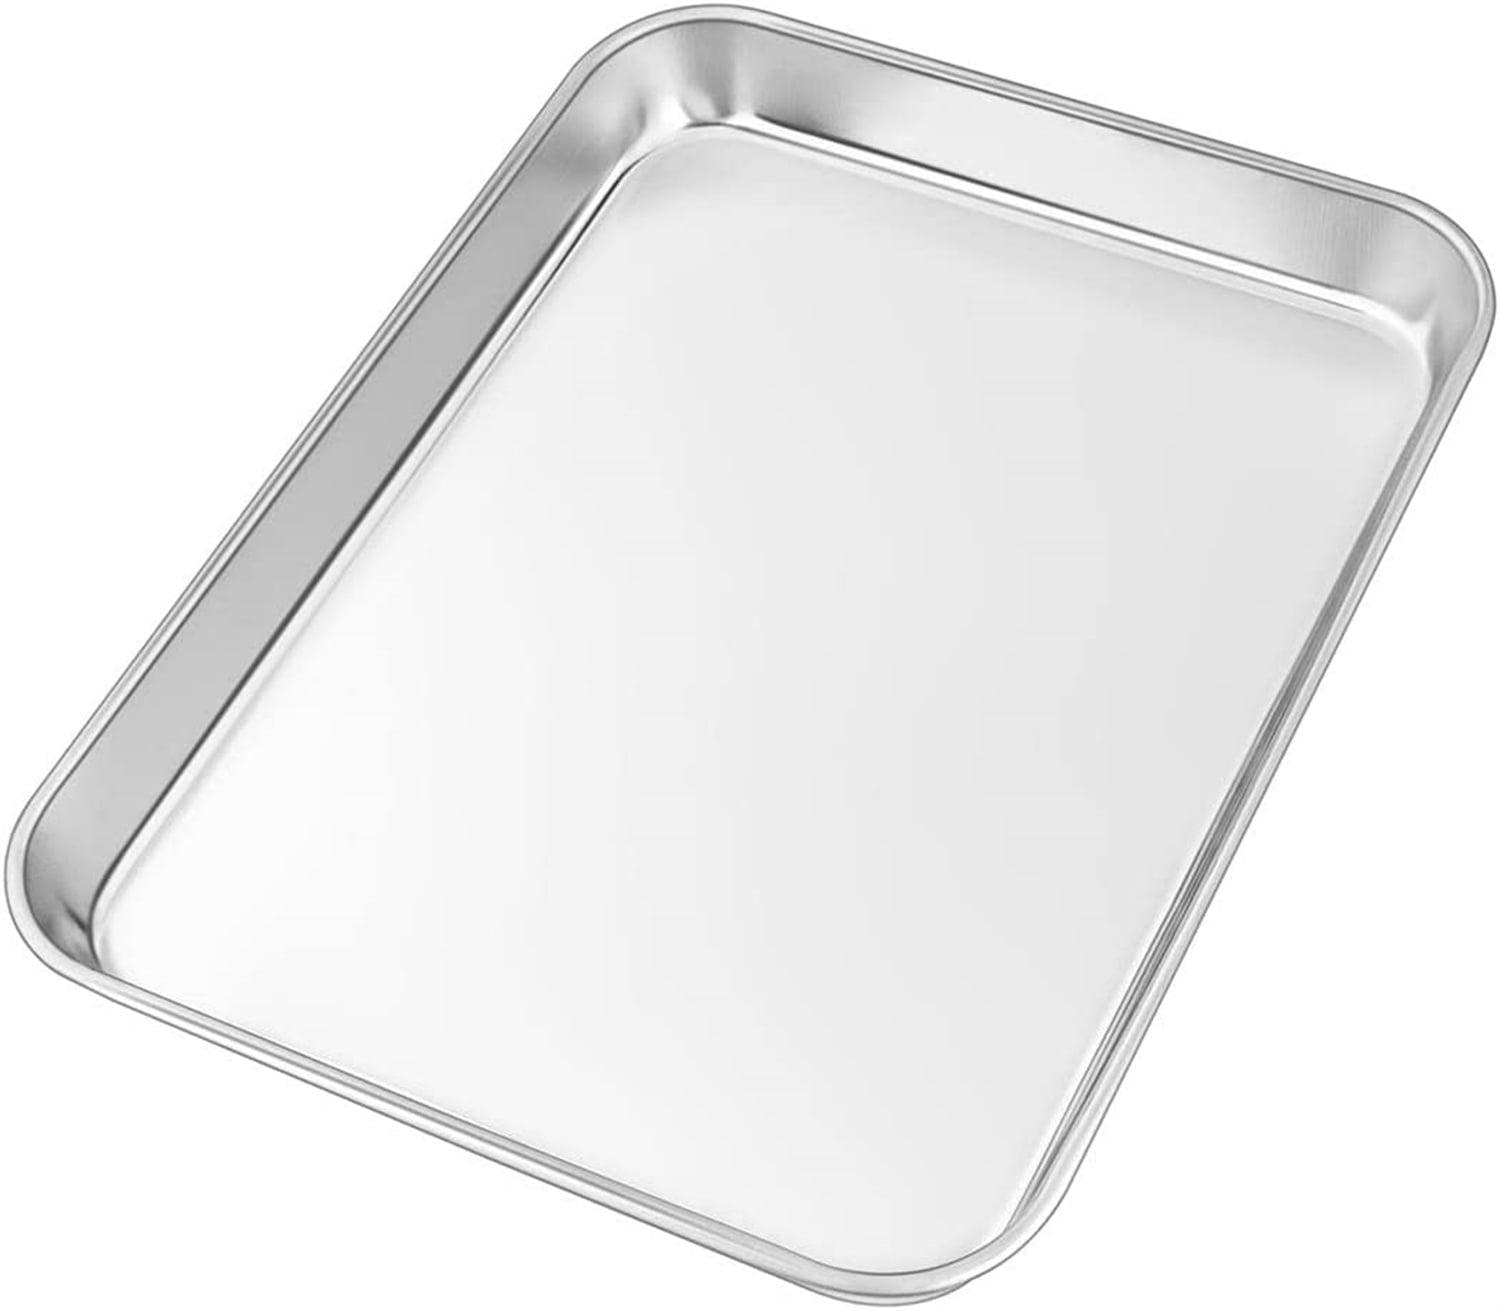 Non Stick Oven Baking Tray,urable Flat Stainless Steel Baking Trays with  Non Stick Coating Cooking and Roasting(Large)